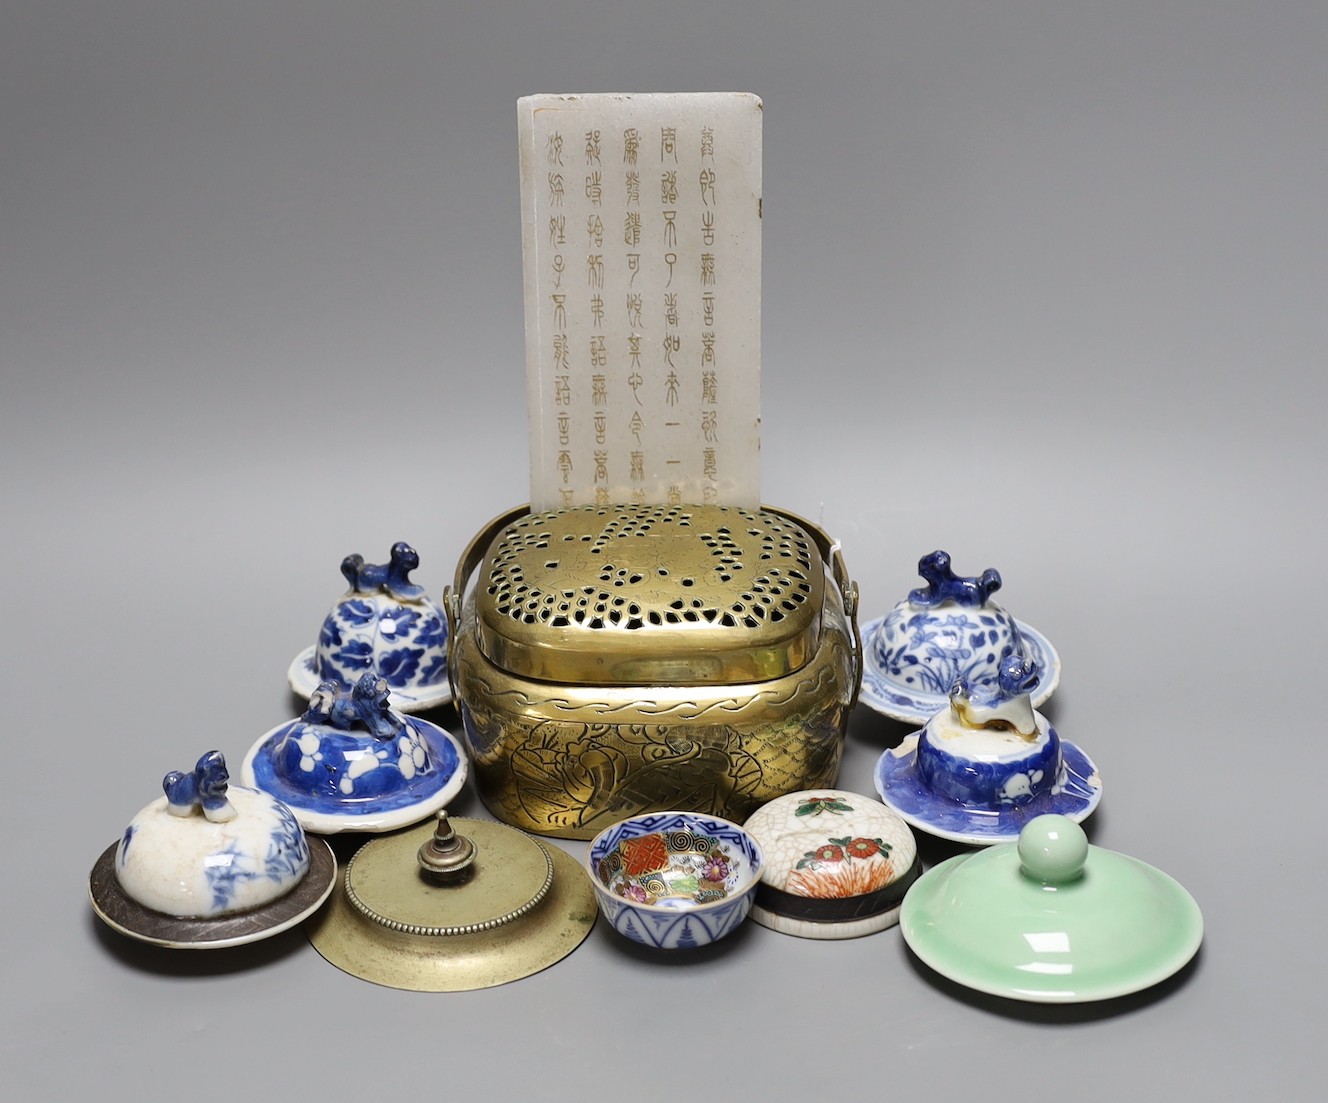 A collection of various Chinese porcelain lids/covers, a clobbered blue and white tea bowl, a brass hand warmer and a hardstone tablet